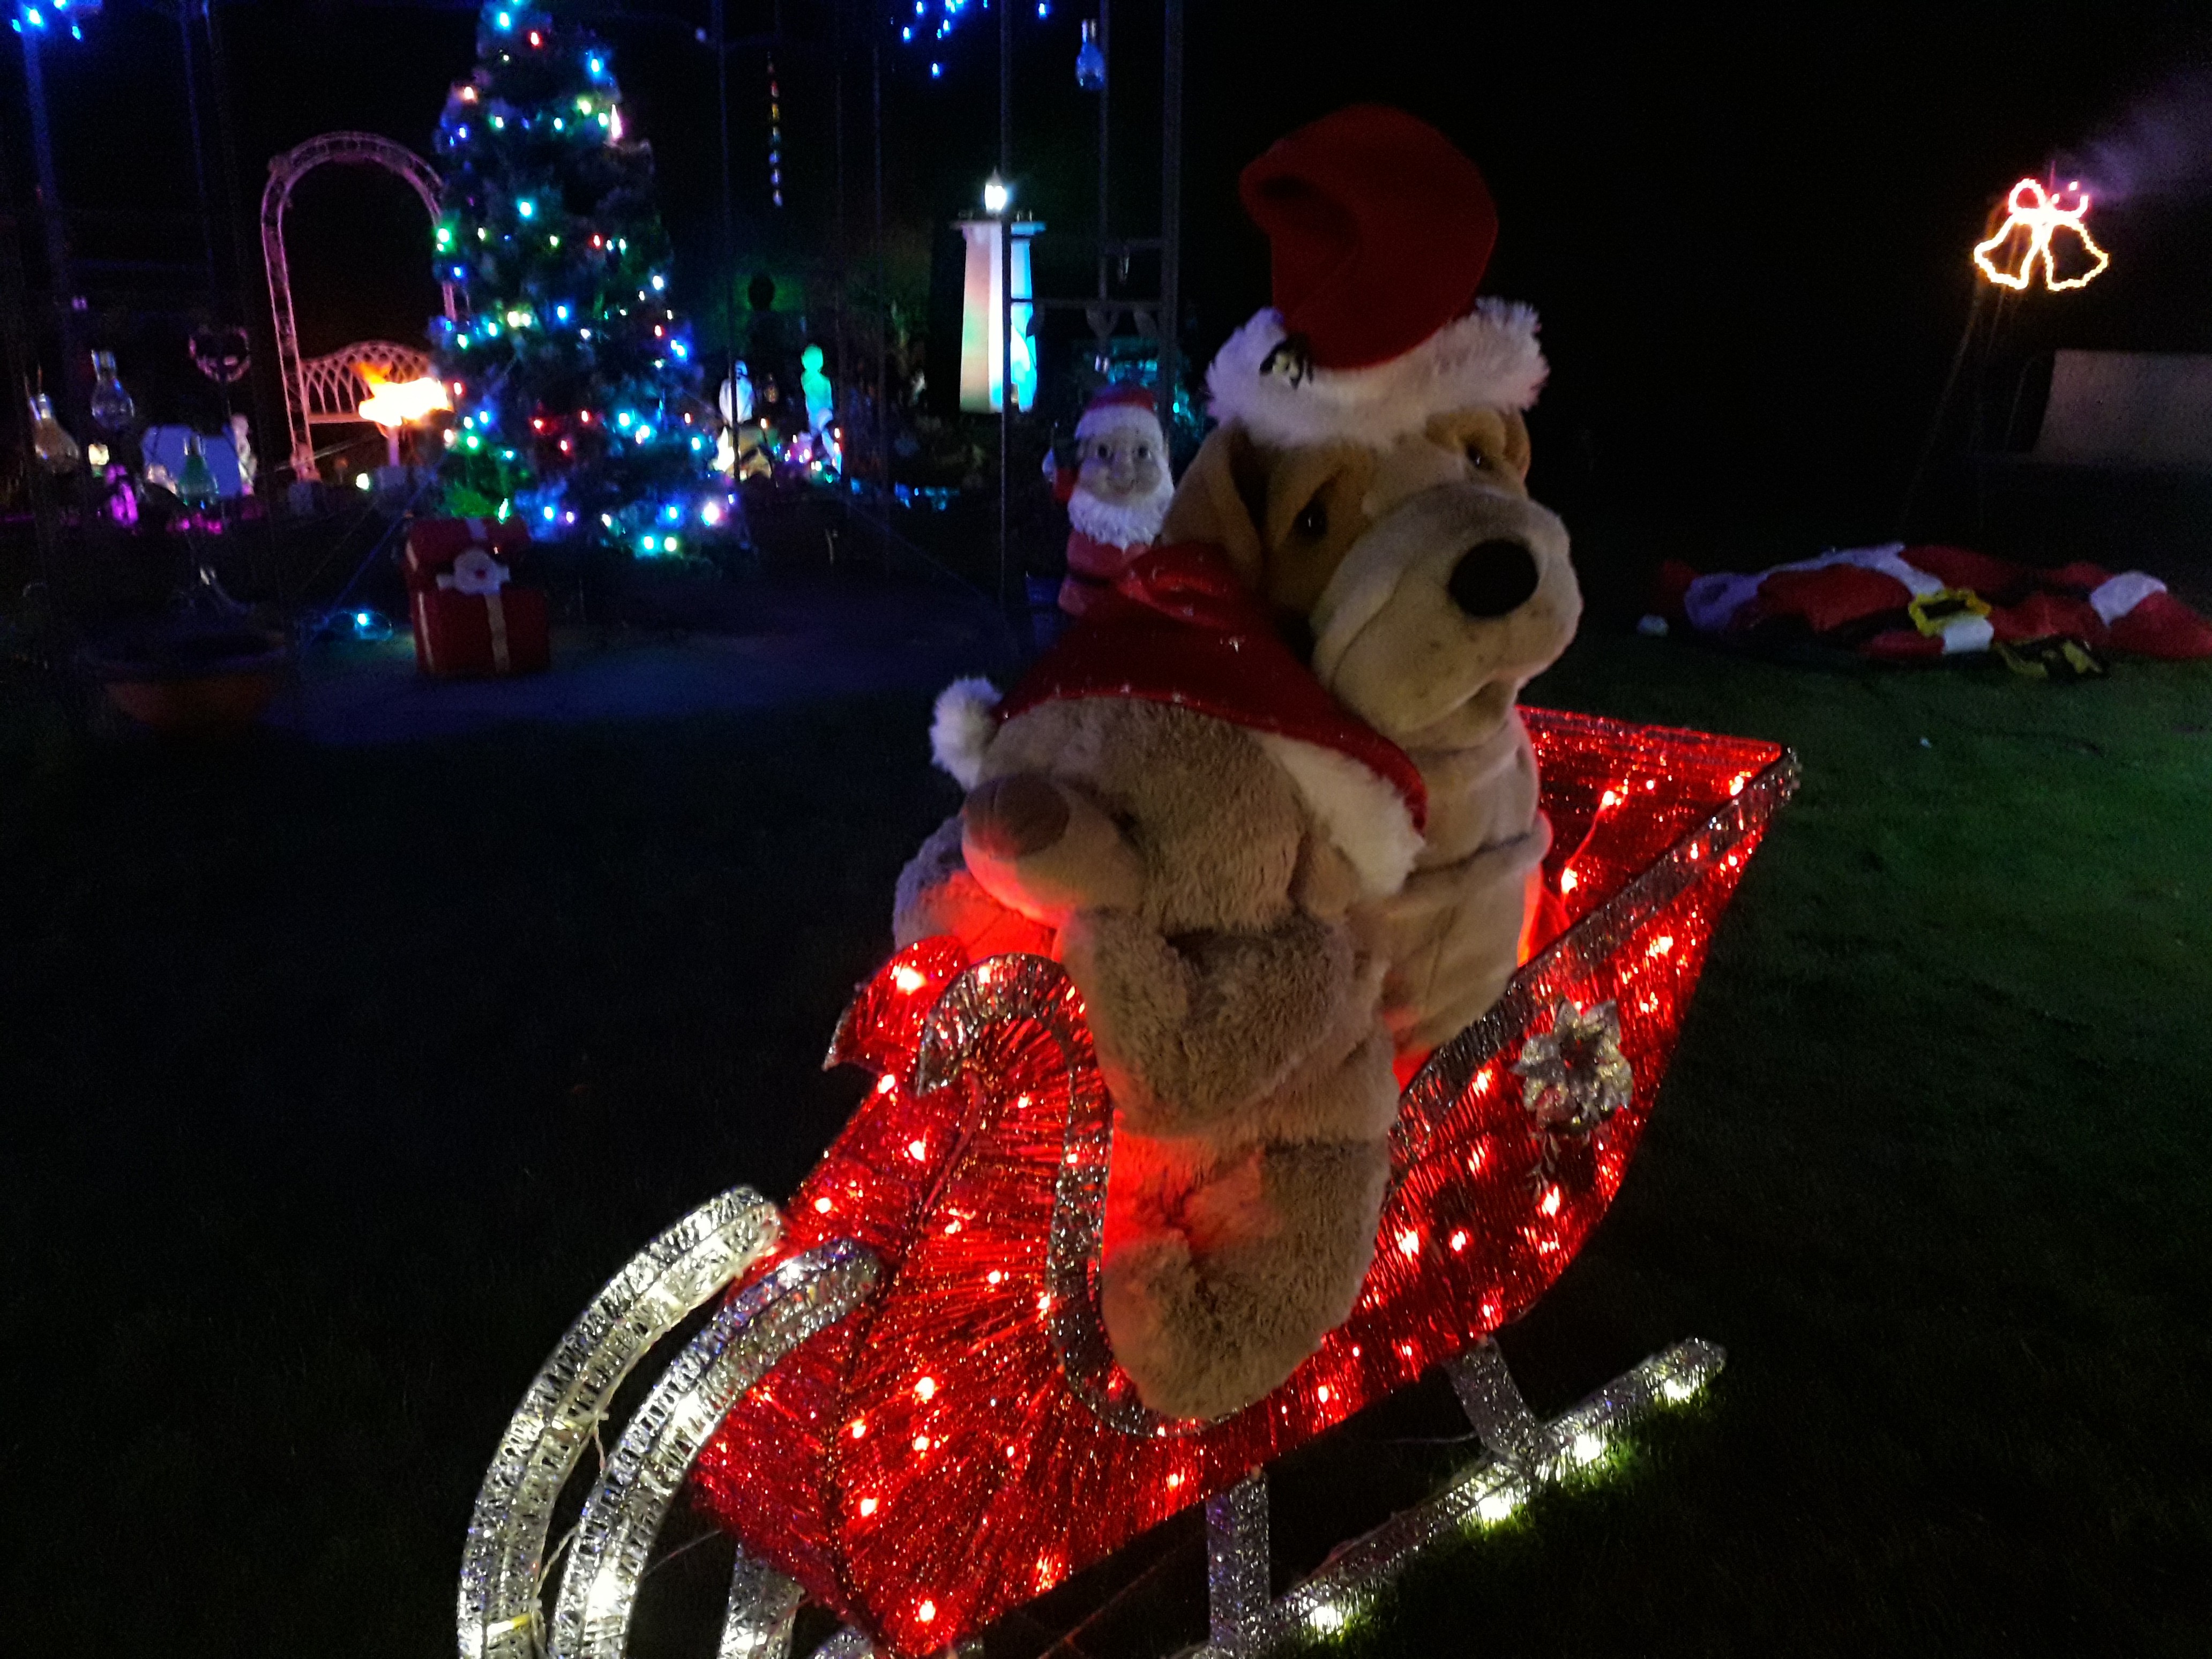 Christine Gregory, the author of ‘The Antics of Mrs Paws’ Hosted her Annual Christmas light BBQ